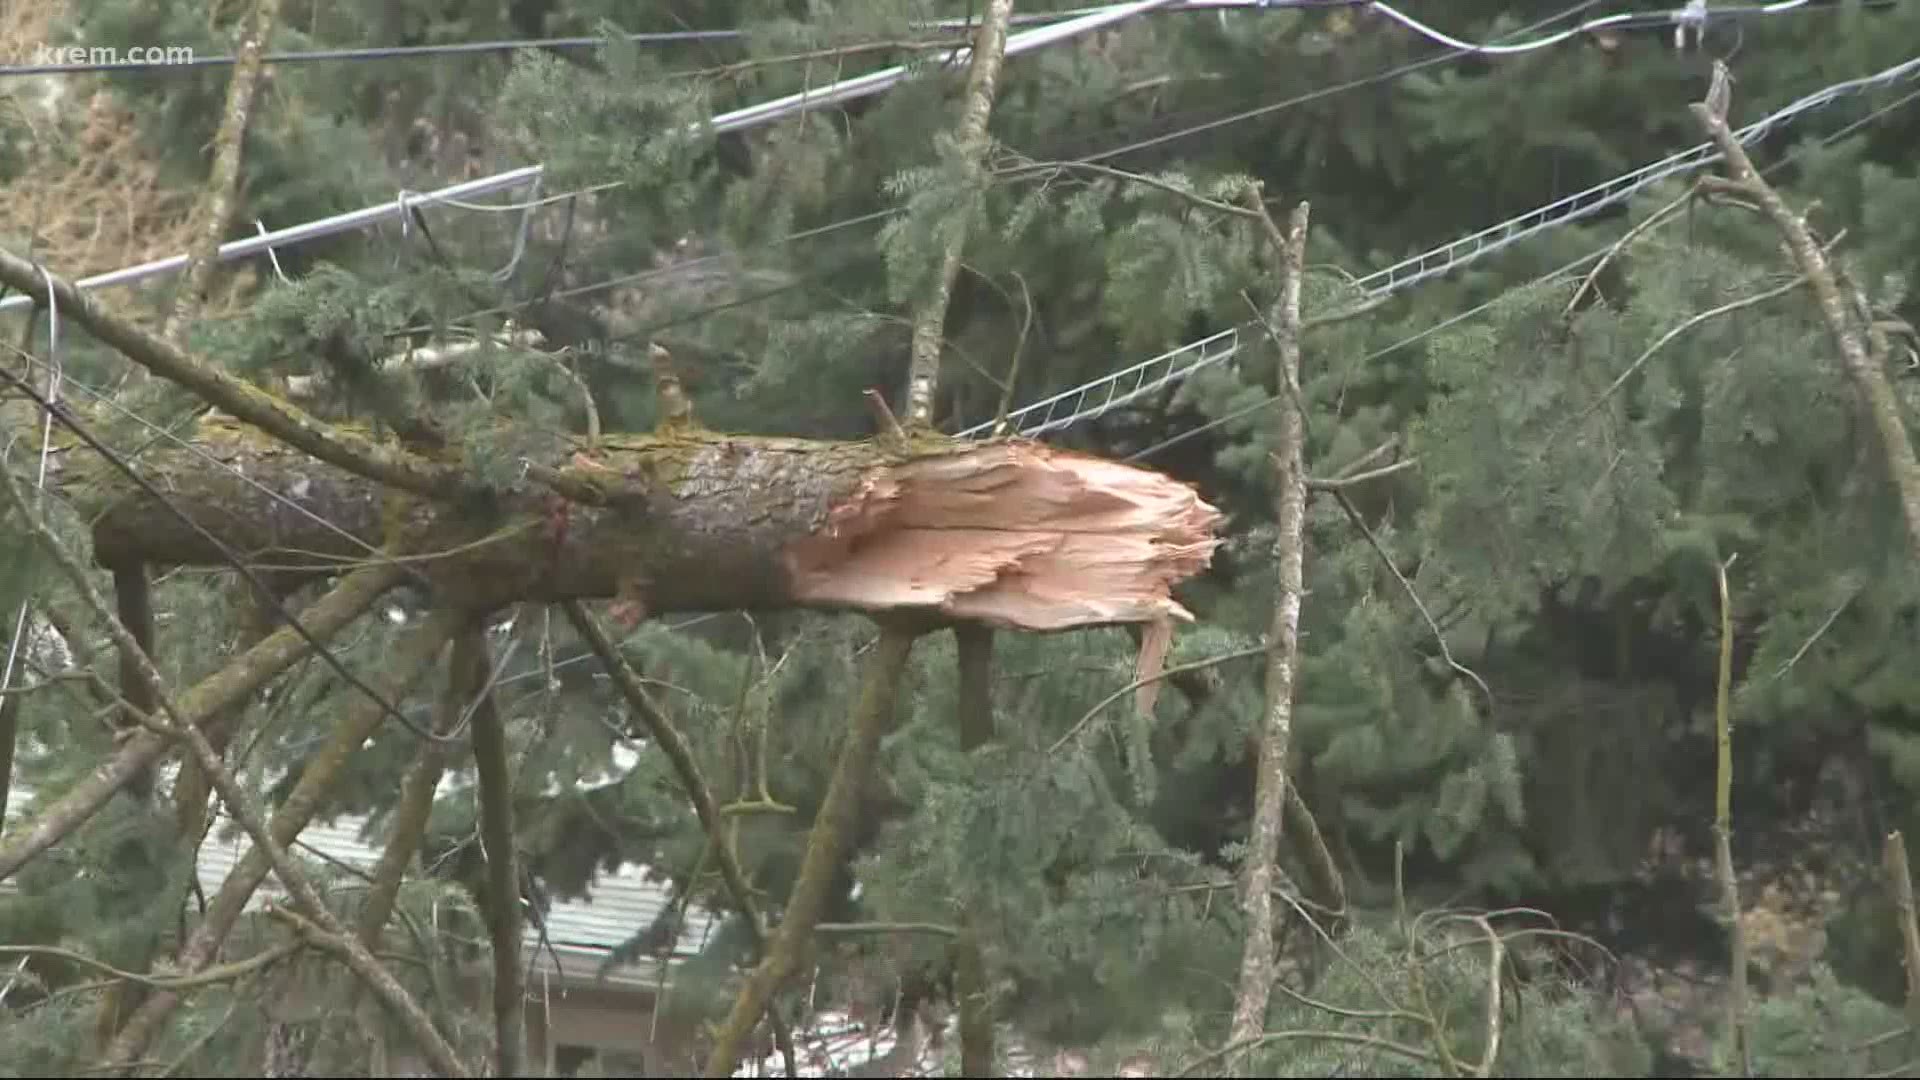 Power outages and downed trees are expected with wind gusts around 60mph this Wednesday.